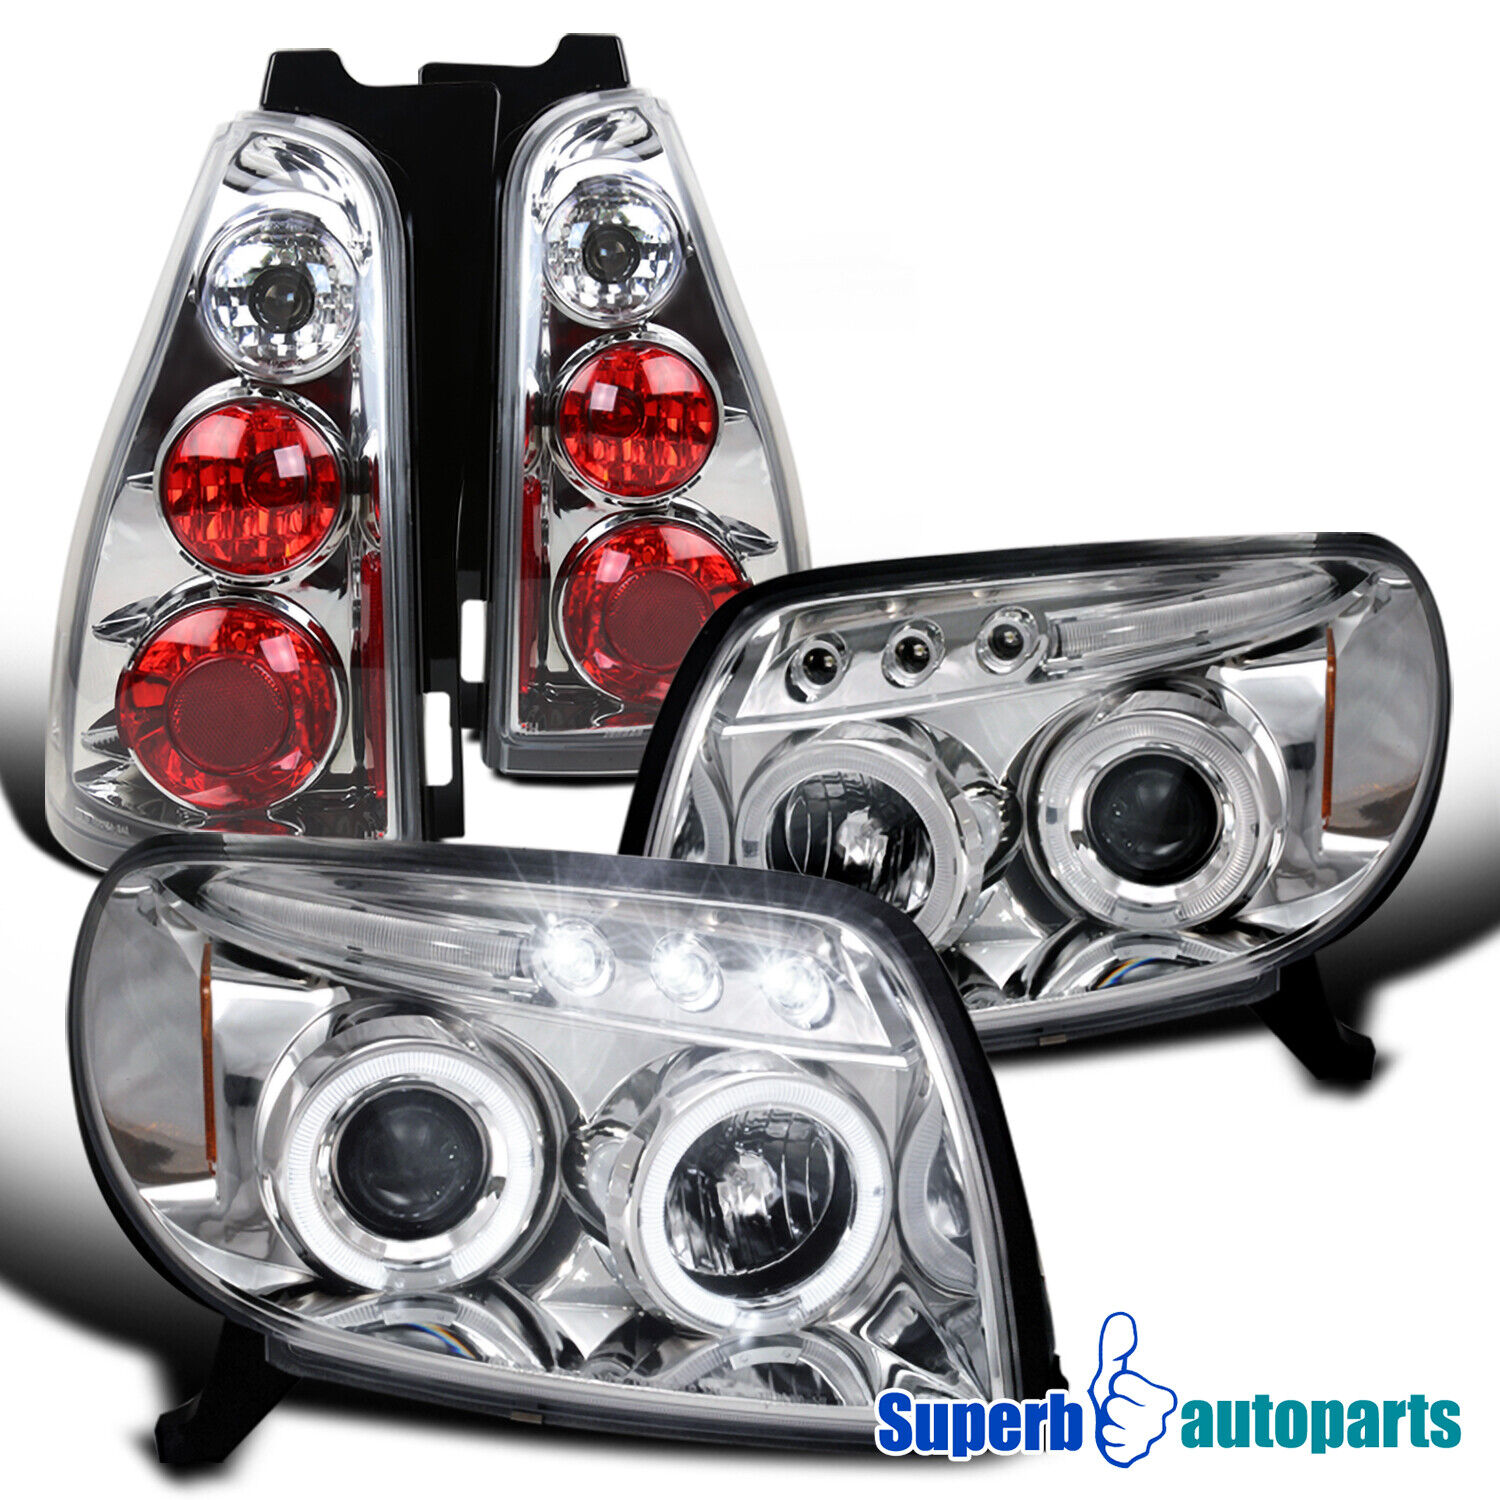 Fits 2003-2005 Toyota 4Runner LED Halo Projector Headlights+Tail Light